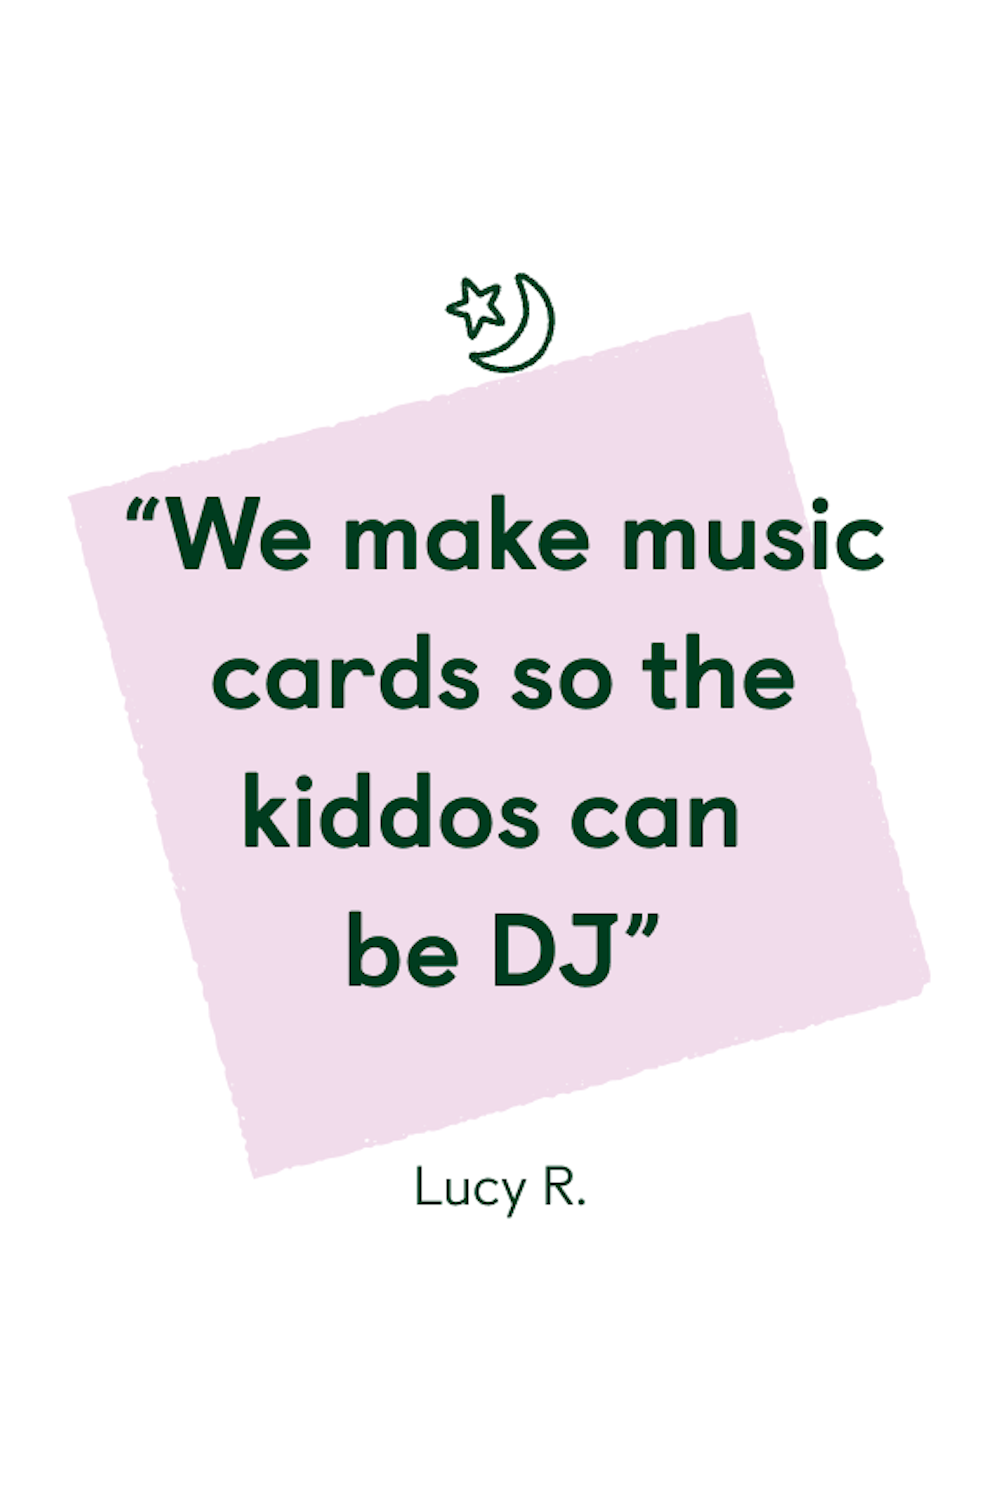 We make music cards so the kiddos can be DJ